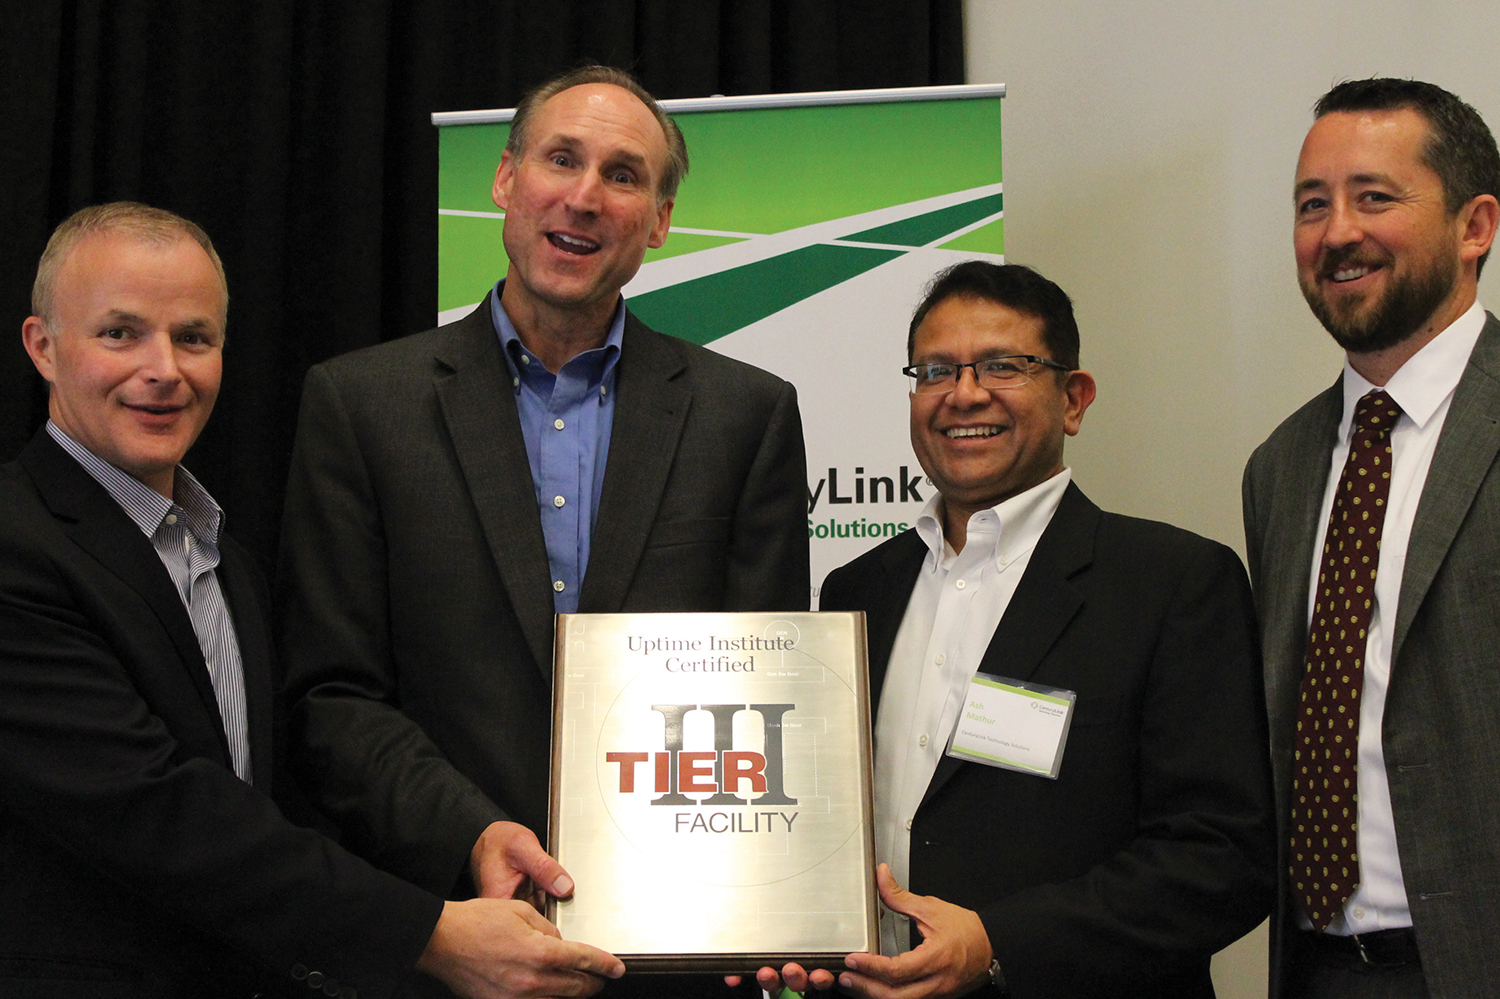 CenturyLink executives (left to right) Joel Stone, Drew Leonard, and Ash Mathur accept the plaque for CenturyLink’s new Tier III Certified Facility in Toronto from Uptime Institute Chief Operating Officer Julian Kudritzki.